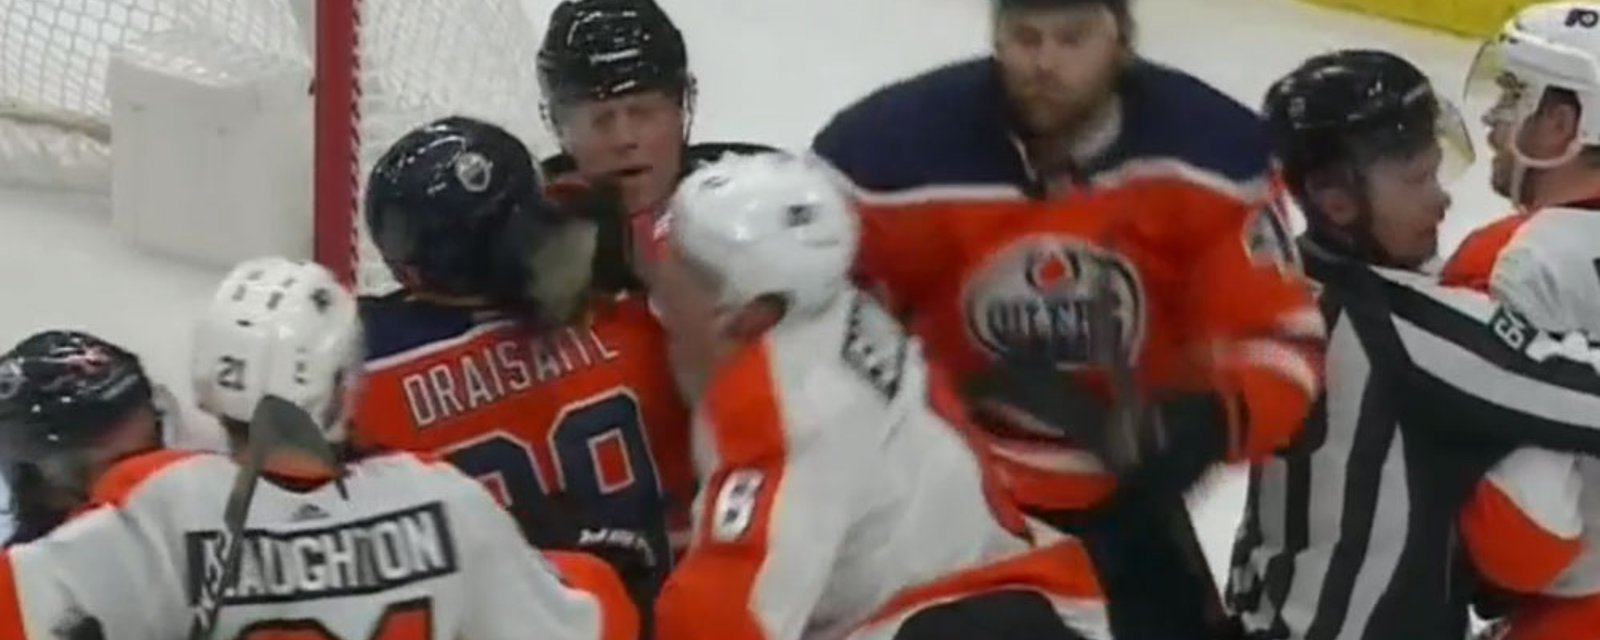 Zack Kassian jumps in scrum to protect Draisaitl! 